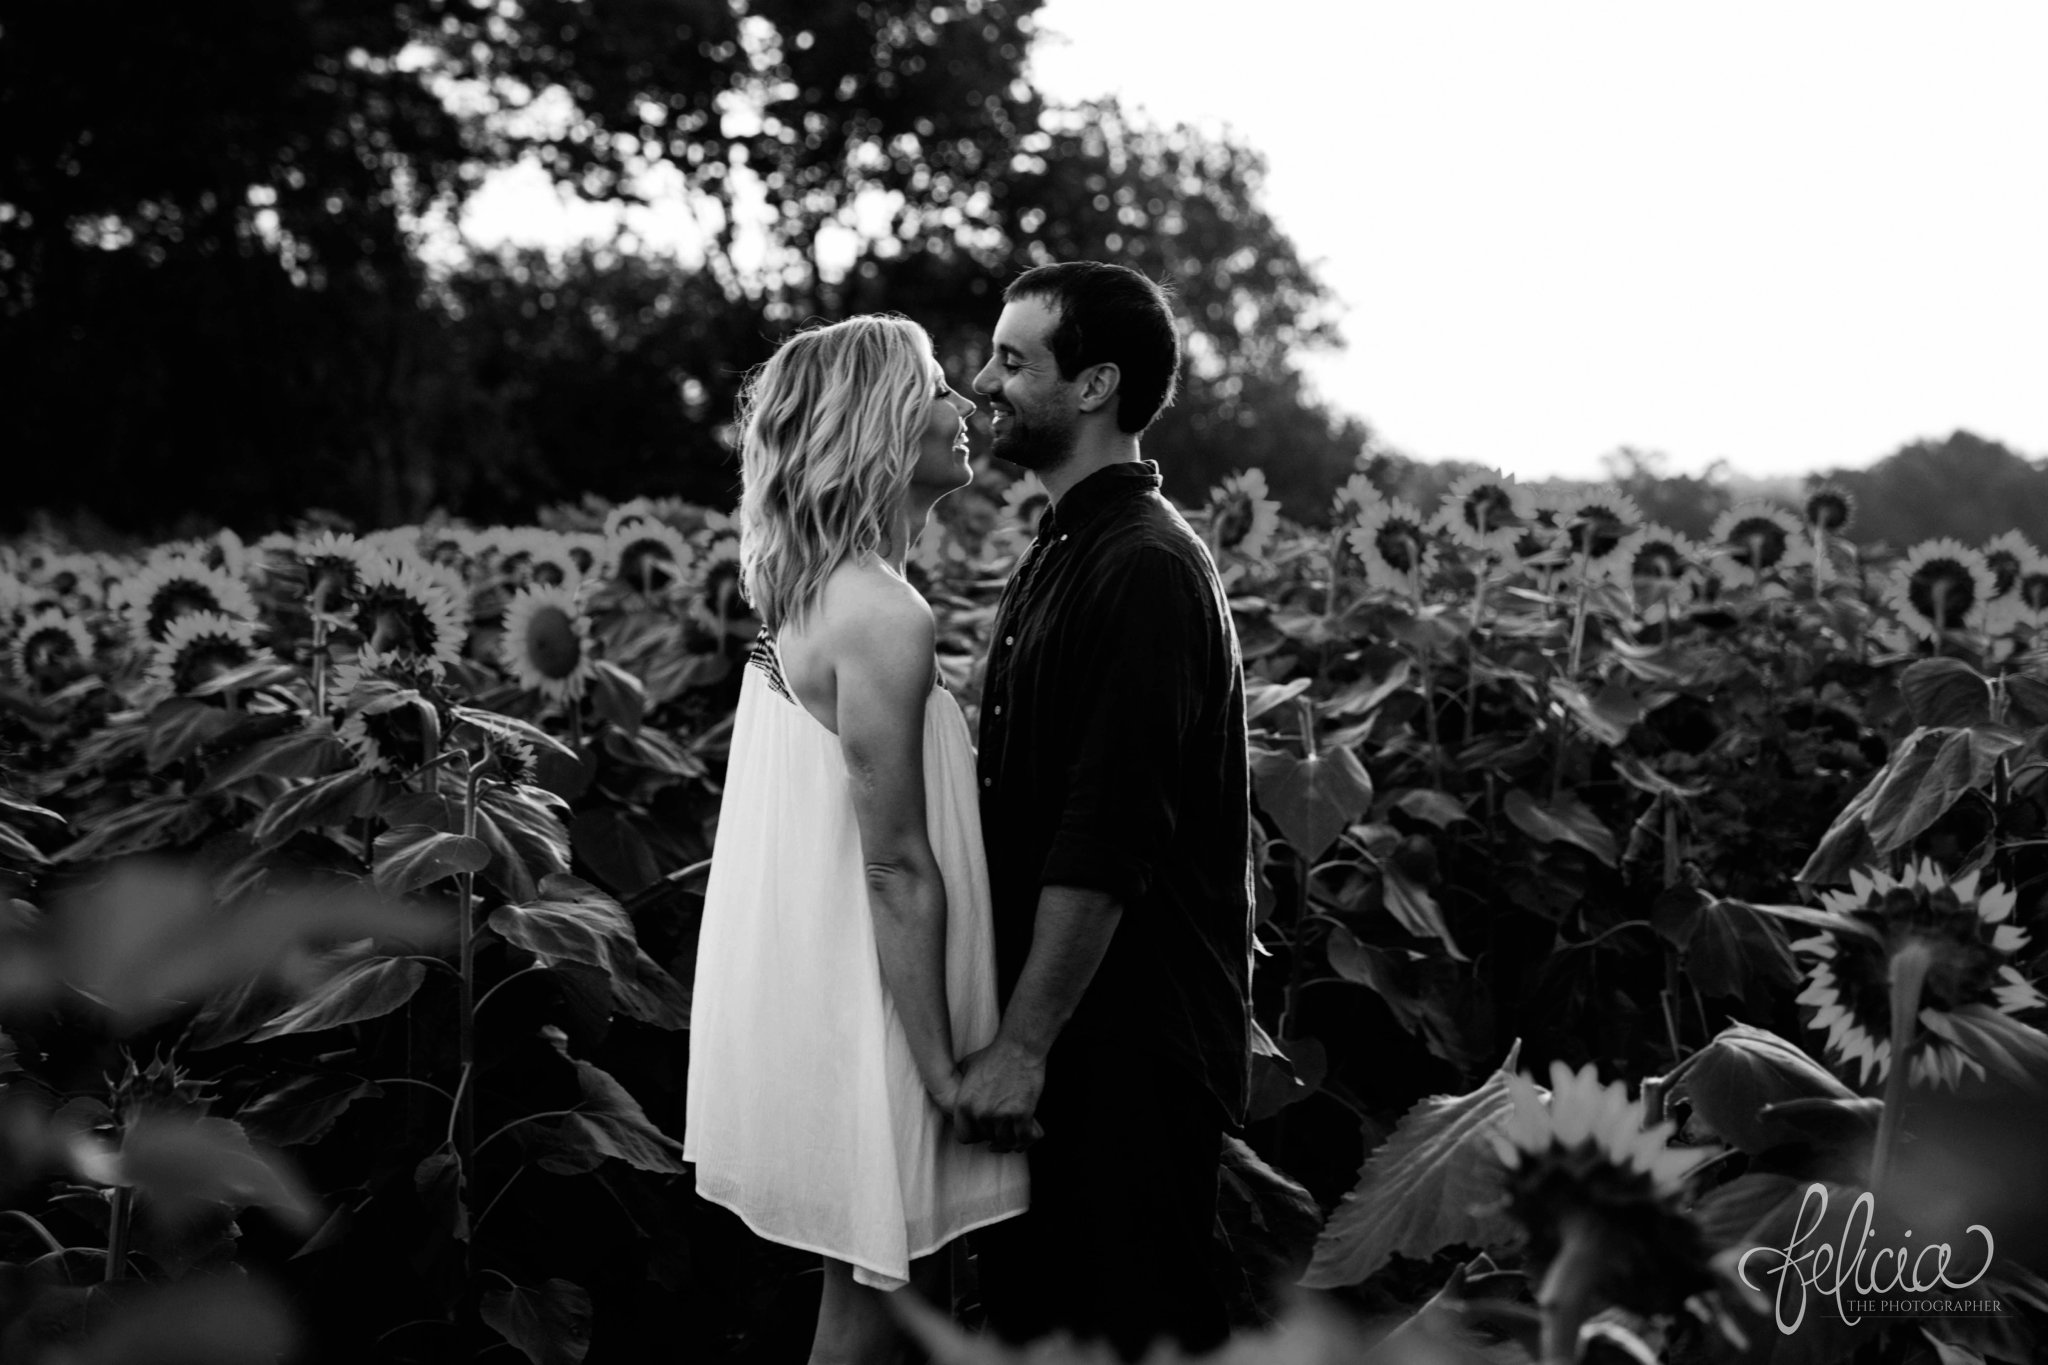 Sunrise Engagement Photos | Felicia The Photographer | Sunflower field | black and white | looking into eyes